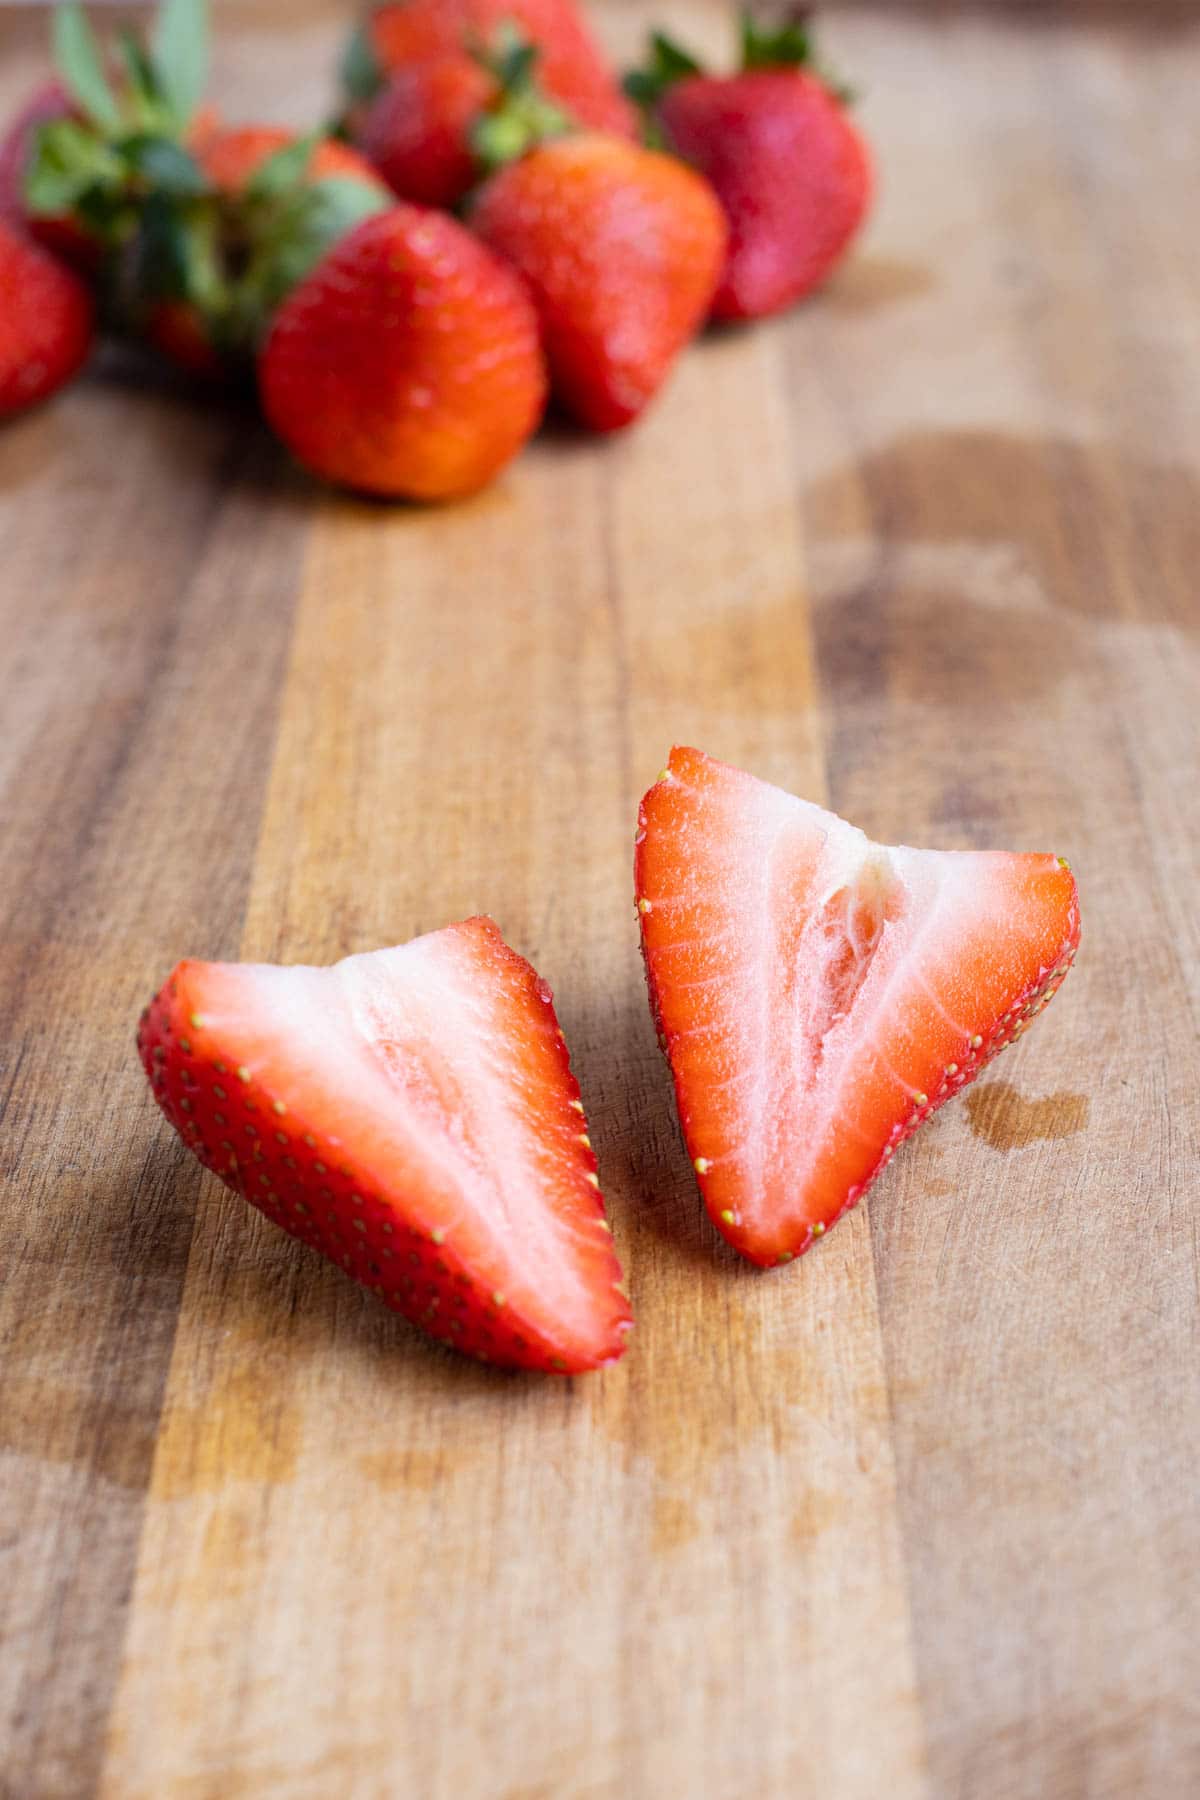 Strawberry halves are shown on a cutting board.